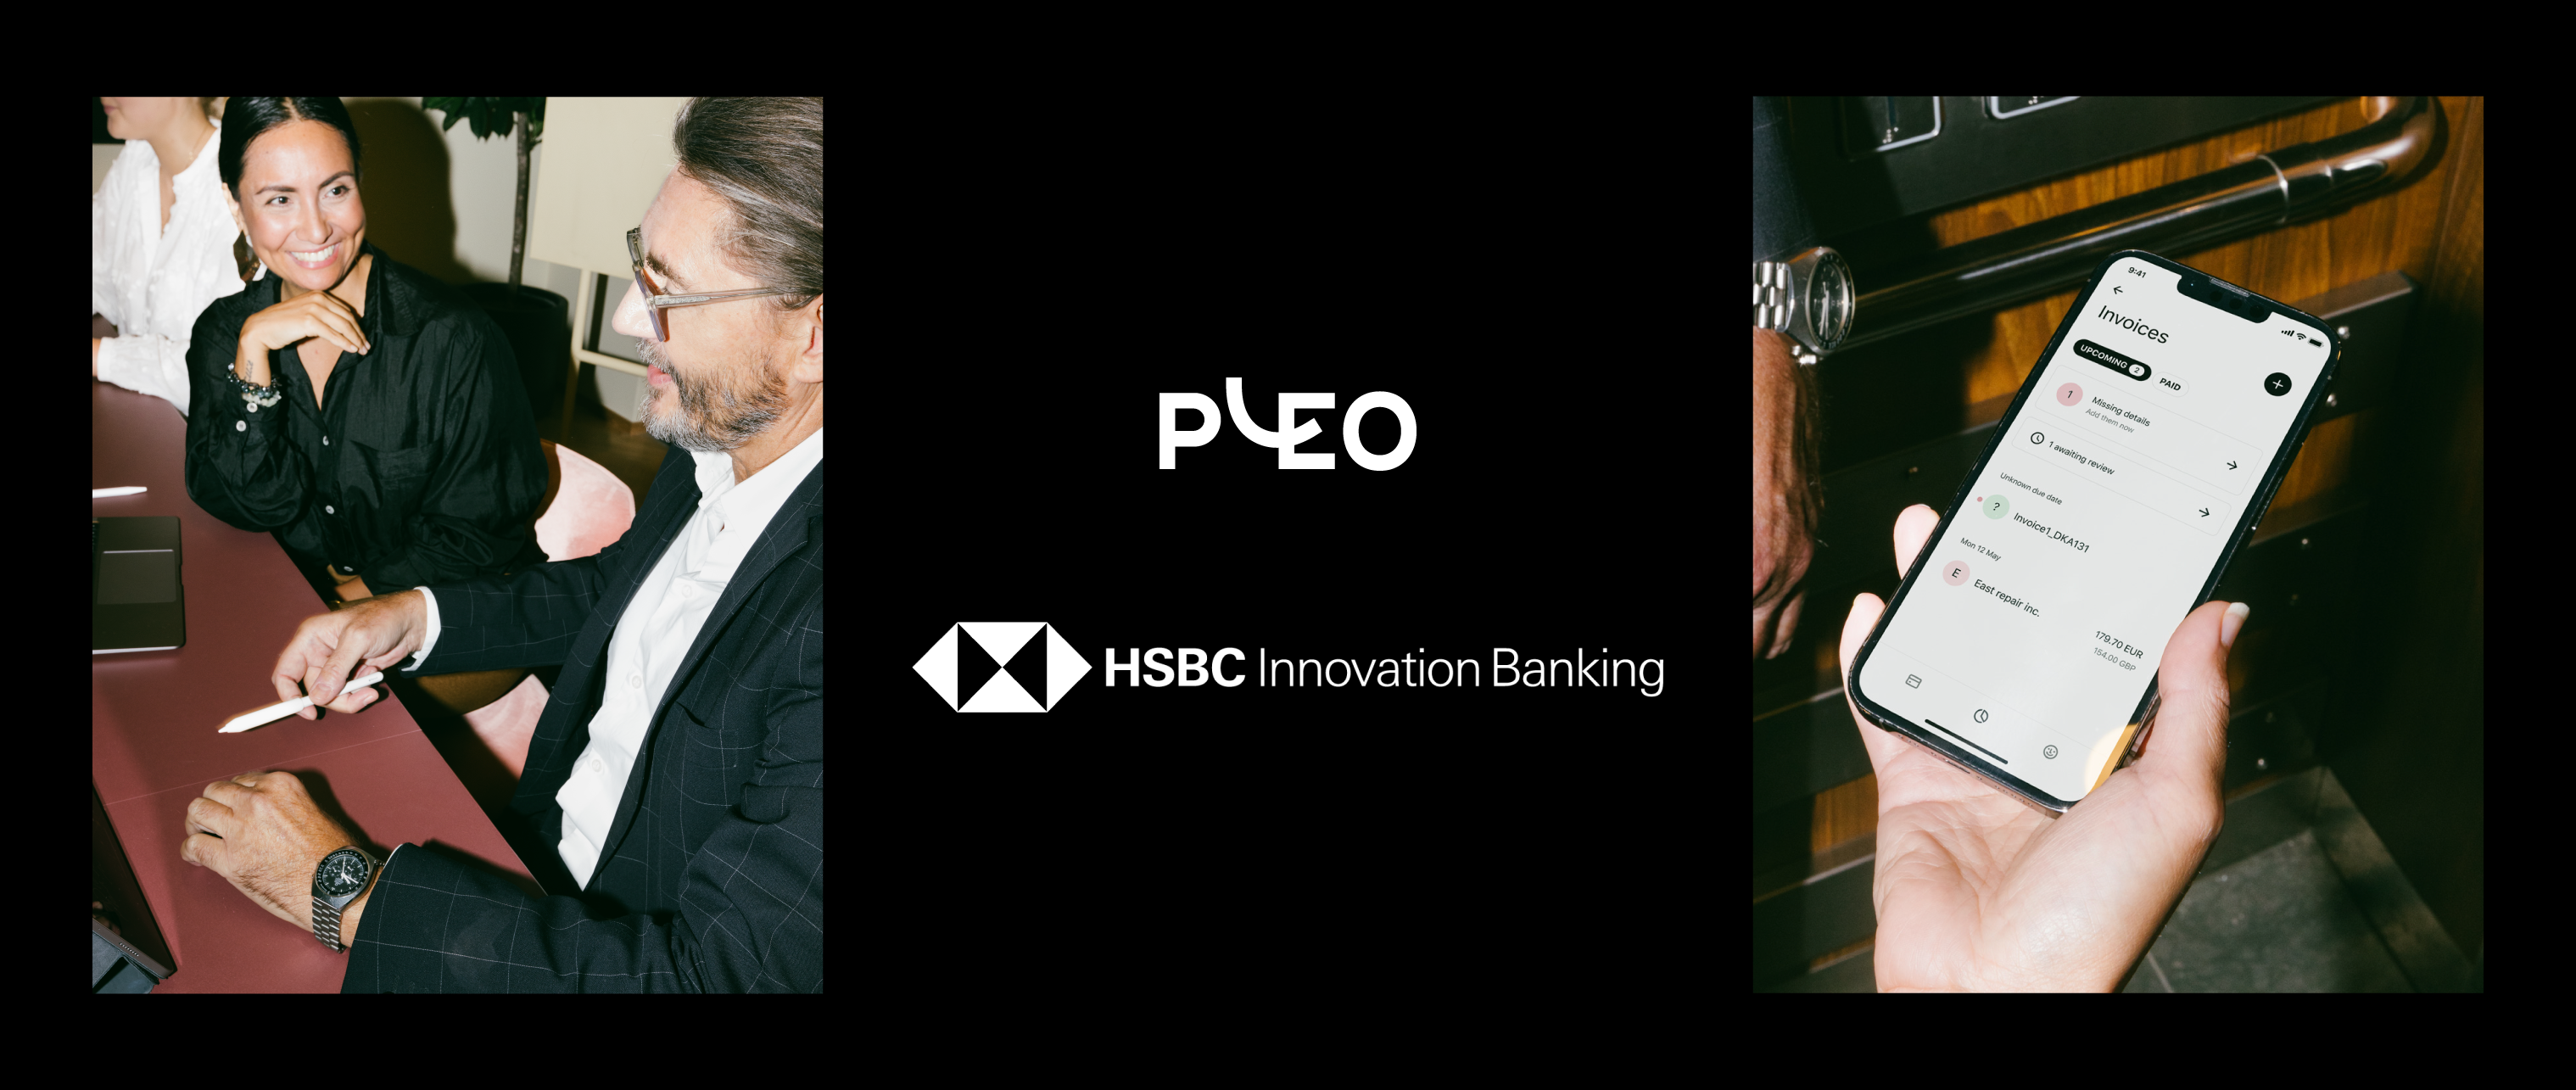 🇩🇰 Pleo: We’ve secured €40M in debt financing from HSBC Innovation Banking to level up our credit offering